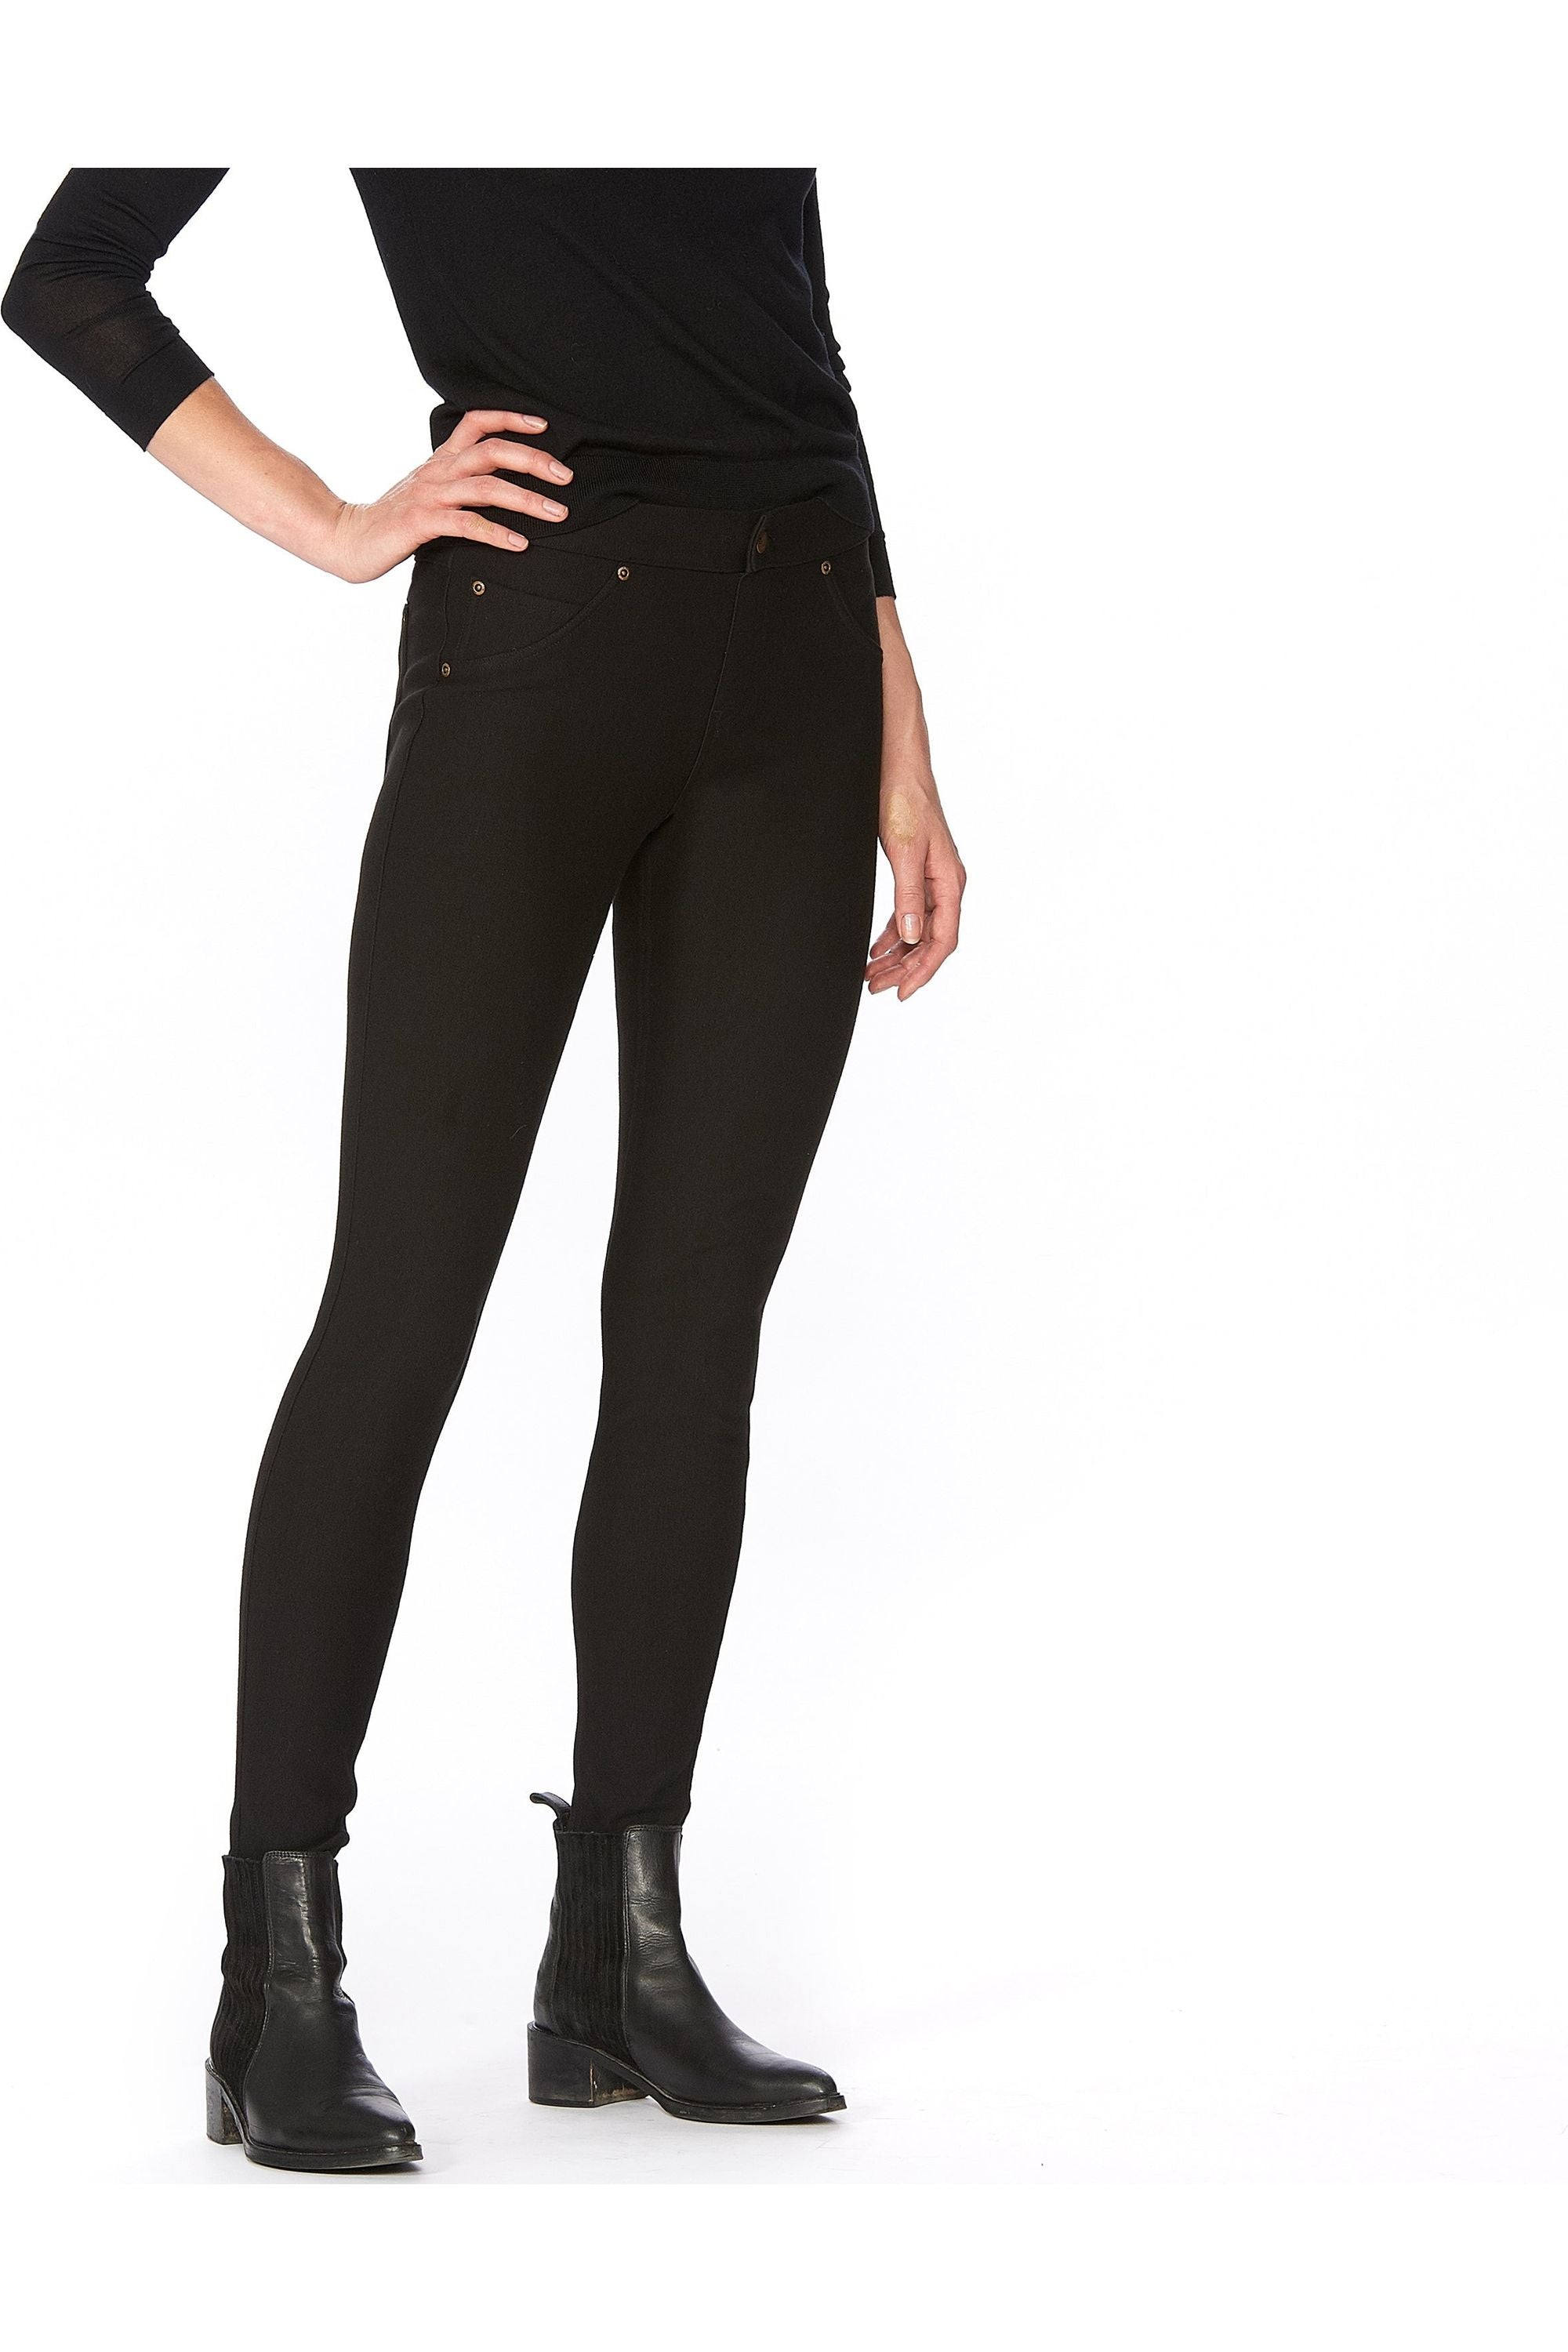 Elietian Fleece Lined High Waisted Seamless Jegging - New Moon Boutique